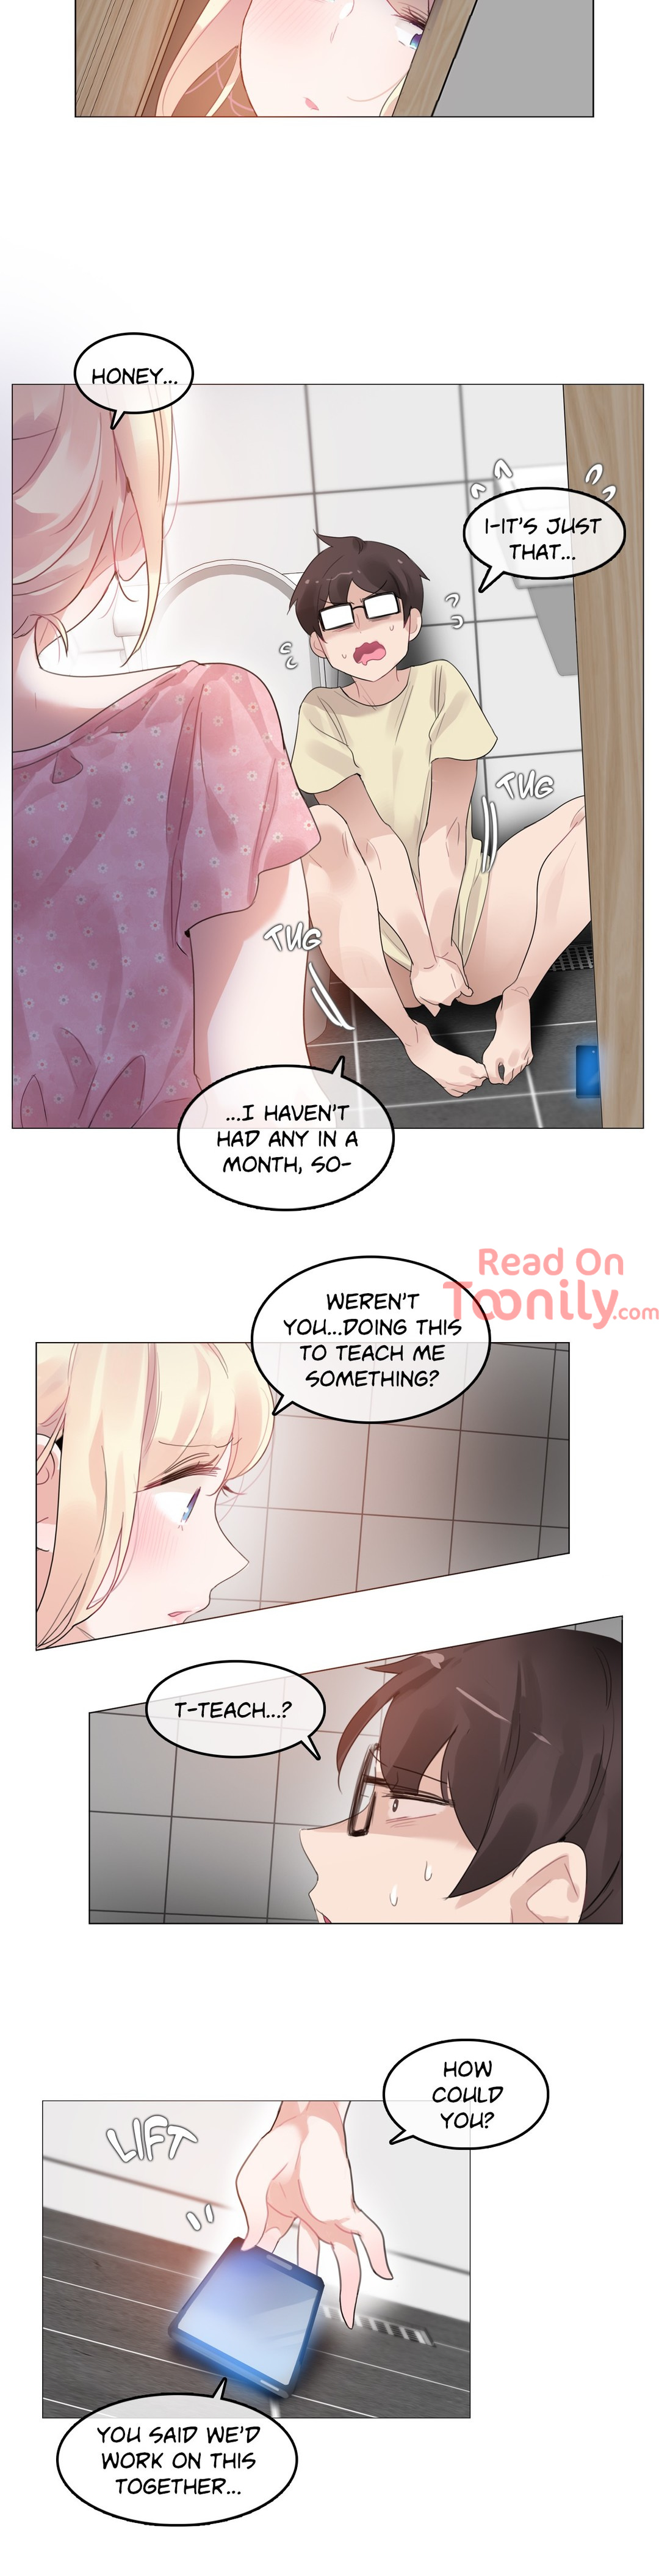 A Pervert’s Daily Life image